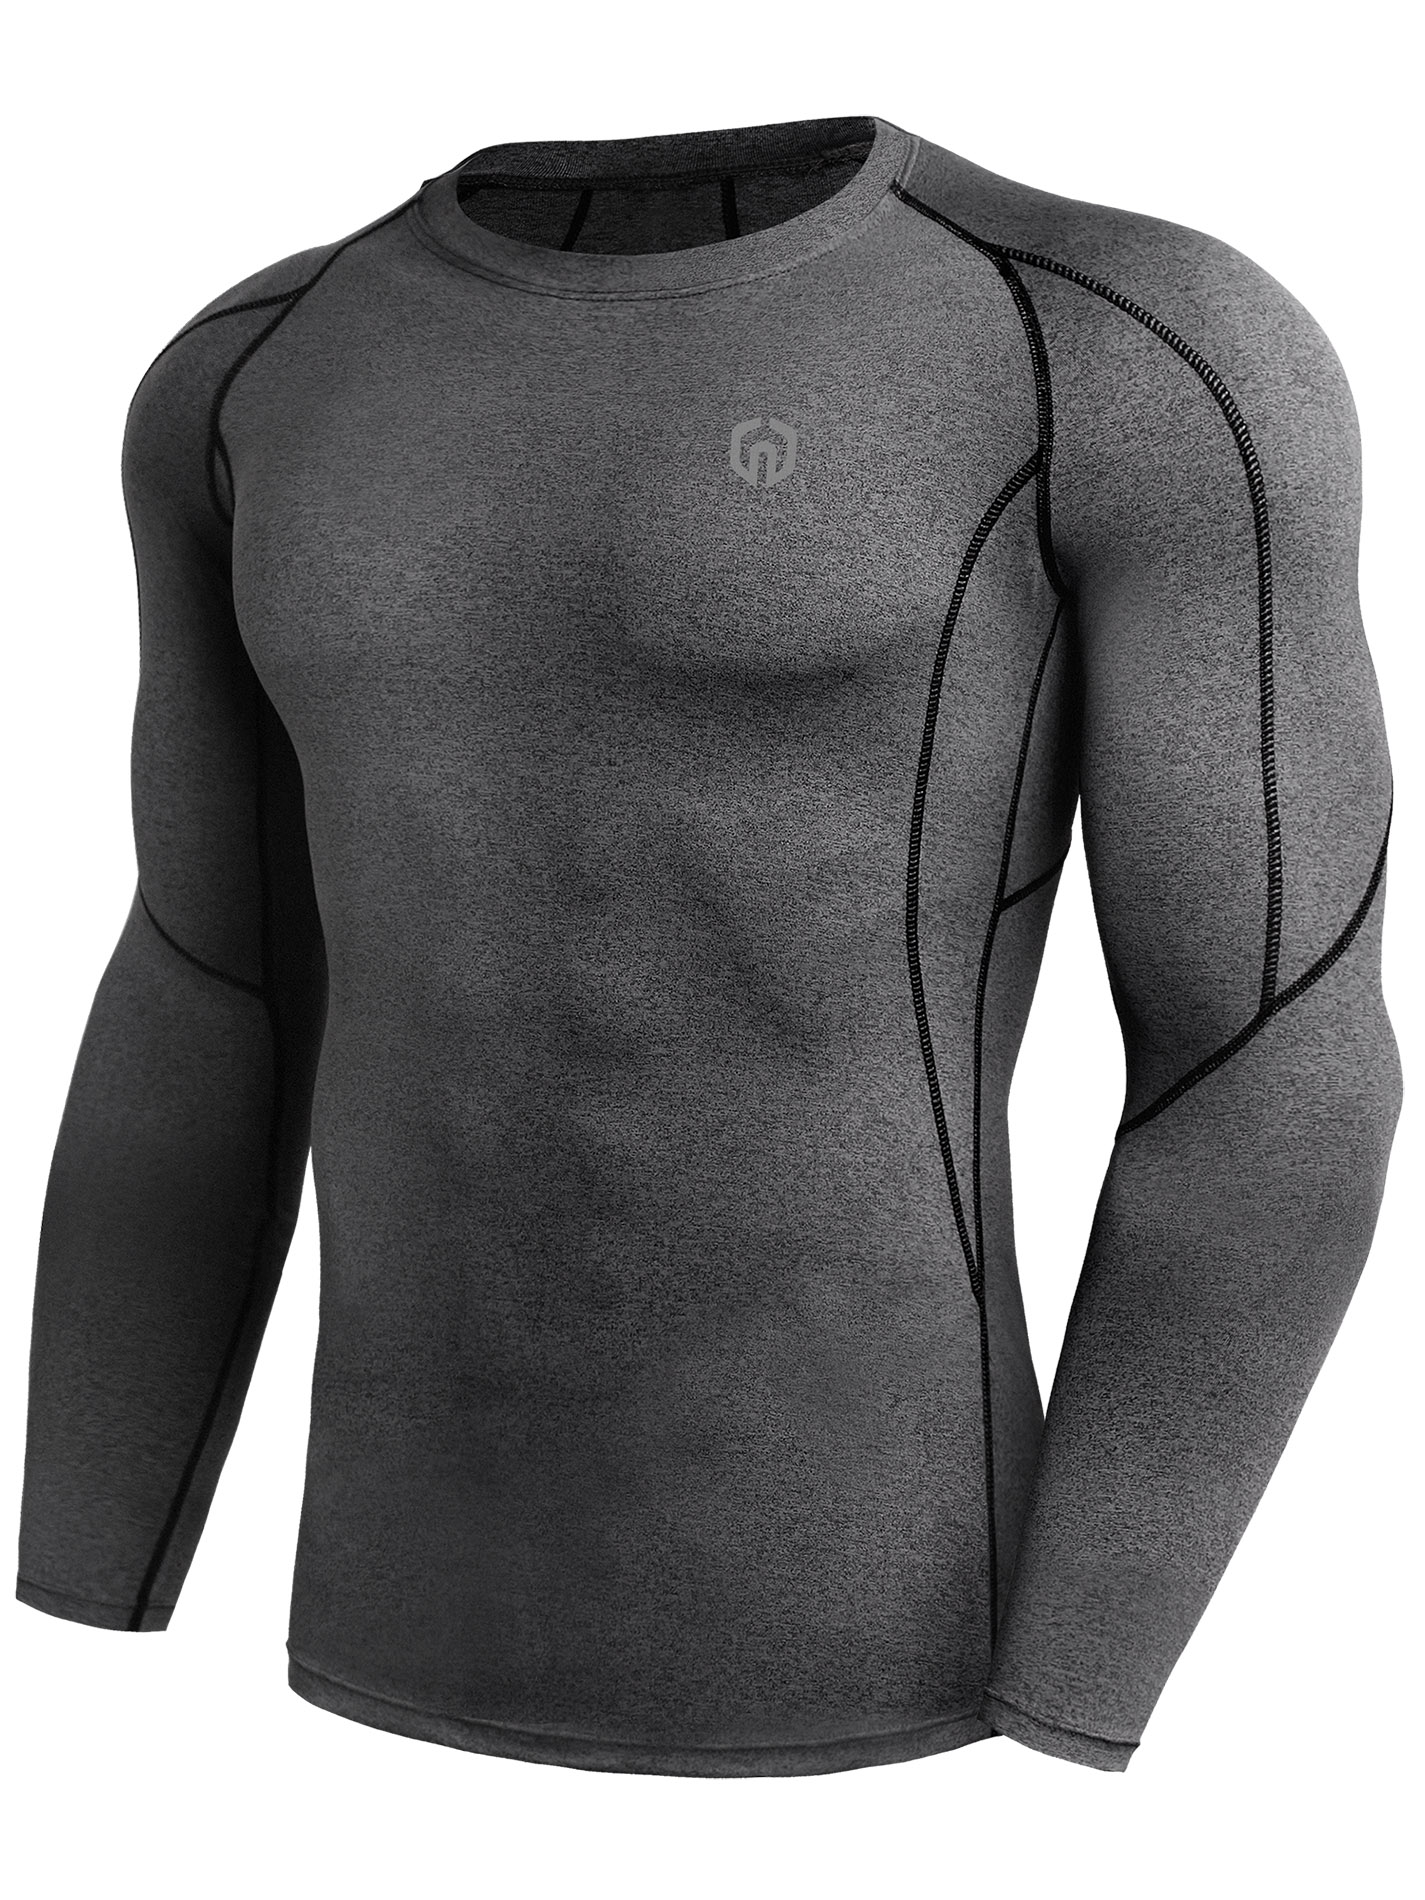 NELEUS Men Dry Fit Long Sleeve Compression Shirts Workout Running ...